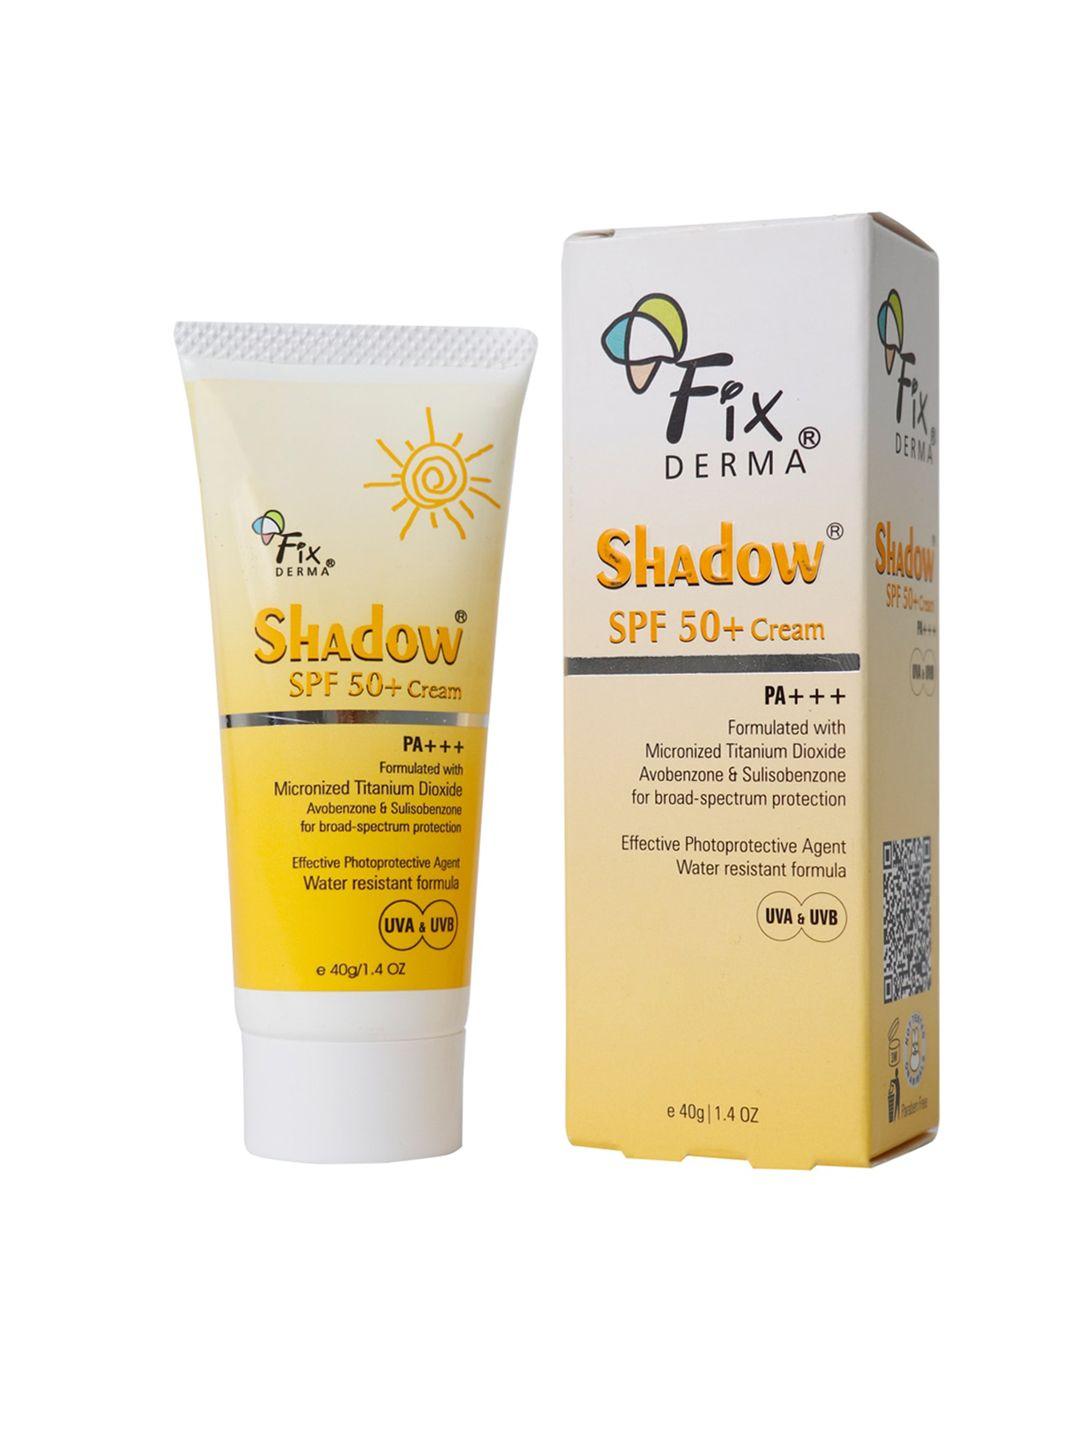 fixderma-shadow-sunscreen-spf-50+-cream-for-dry-skin-with-pa+++-protection---40g